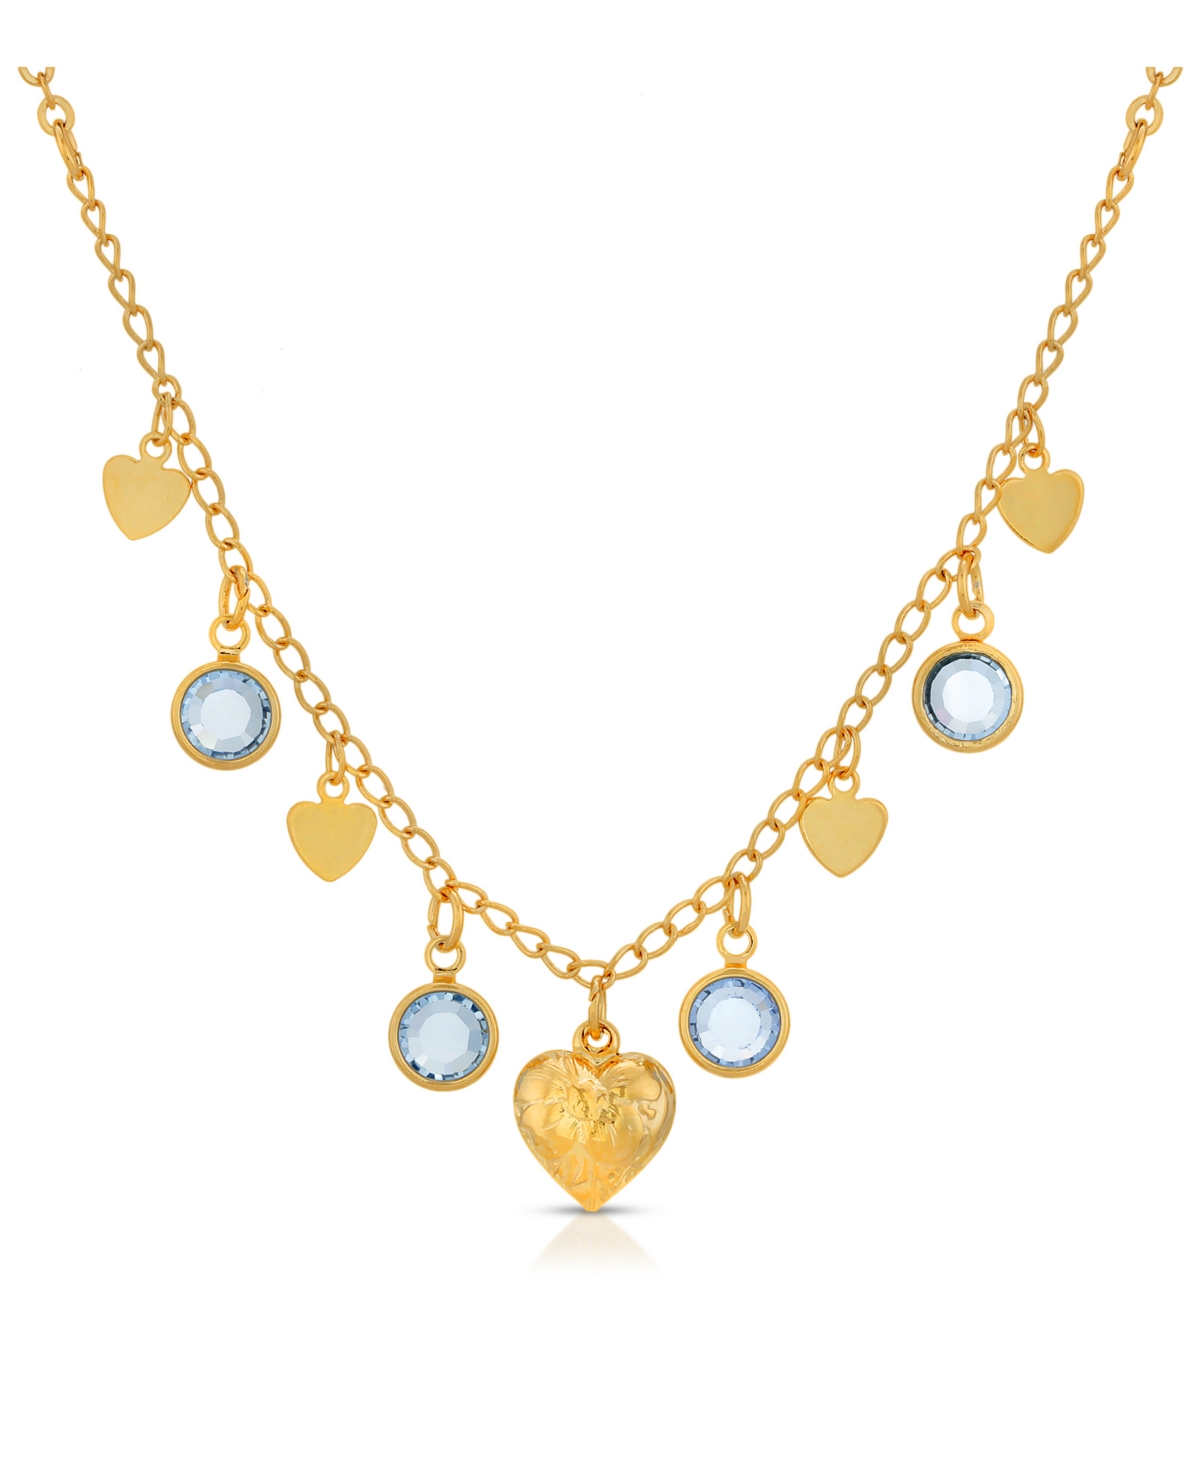 Channels with Hearts Drop Necklace - Blue